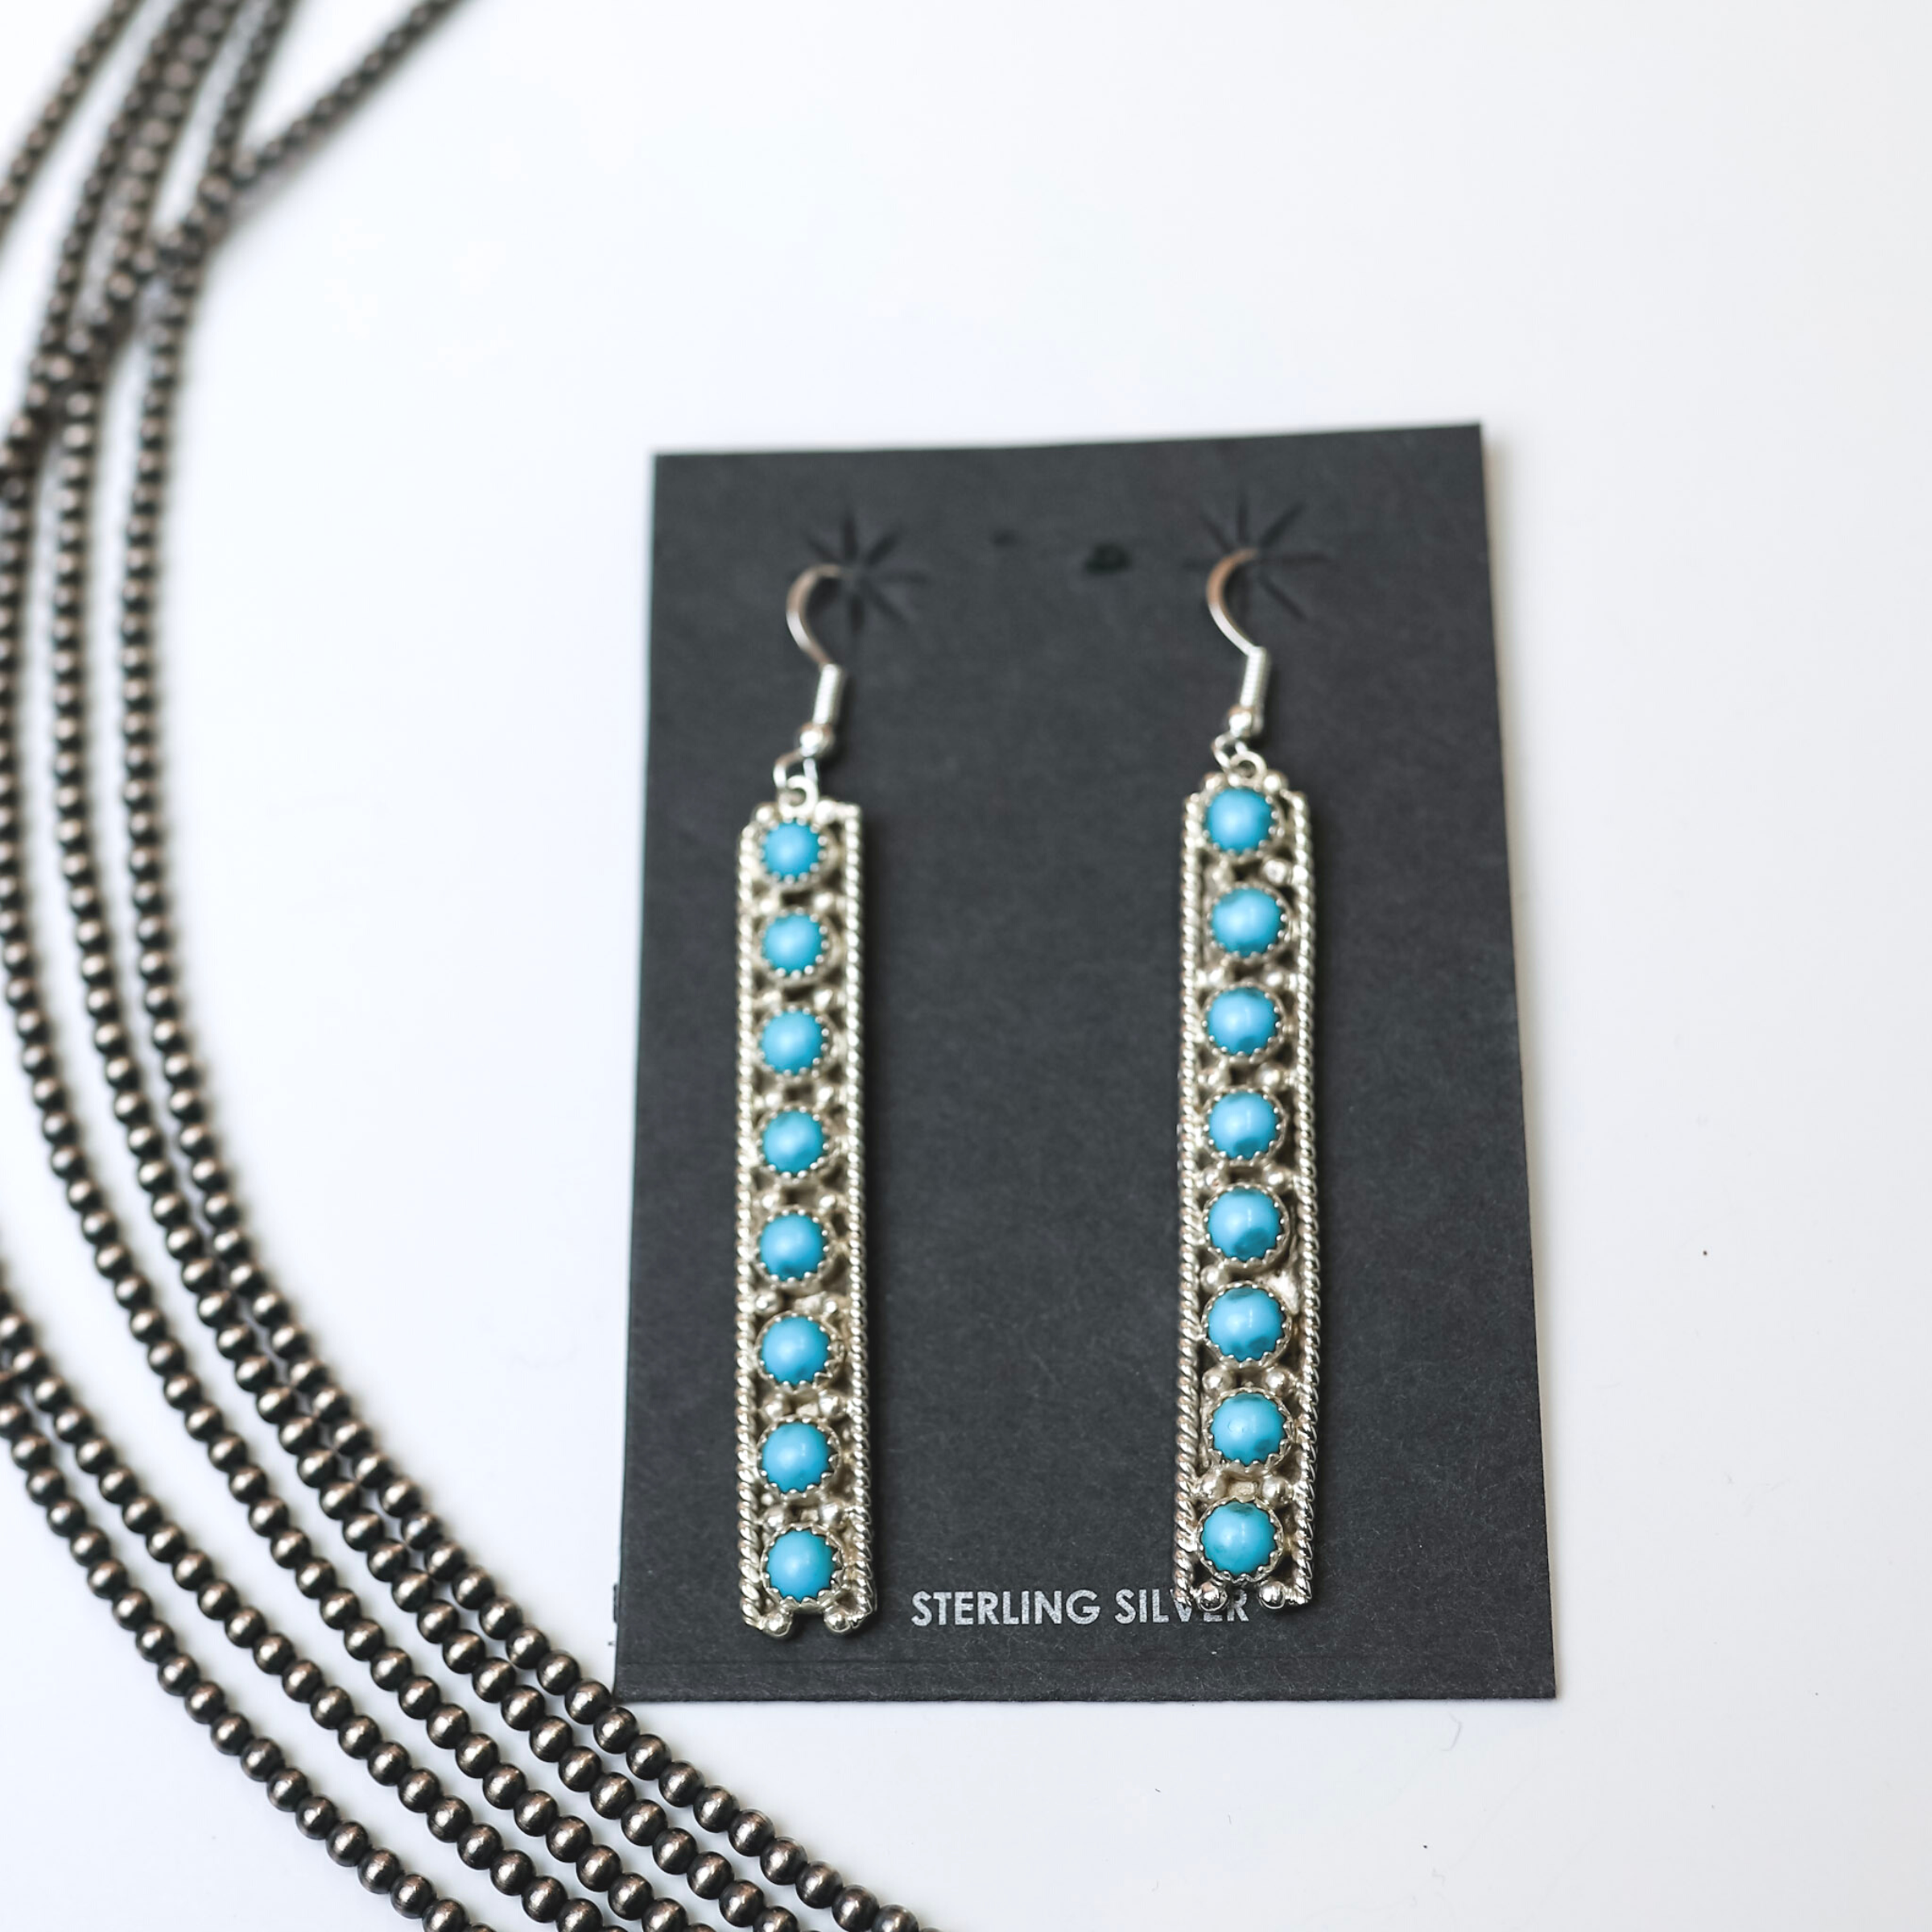 Navajo Handmade Sterling Silver Rectangle Dangle Earrings with Turquoise Stones are centered in the picture, with navajo pearls on the left side of the earrings. All the background is white.  